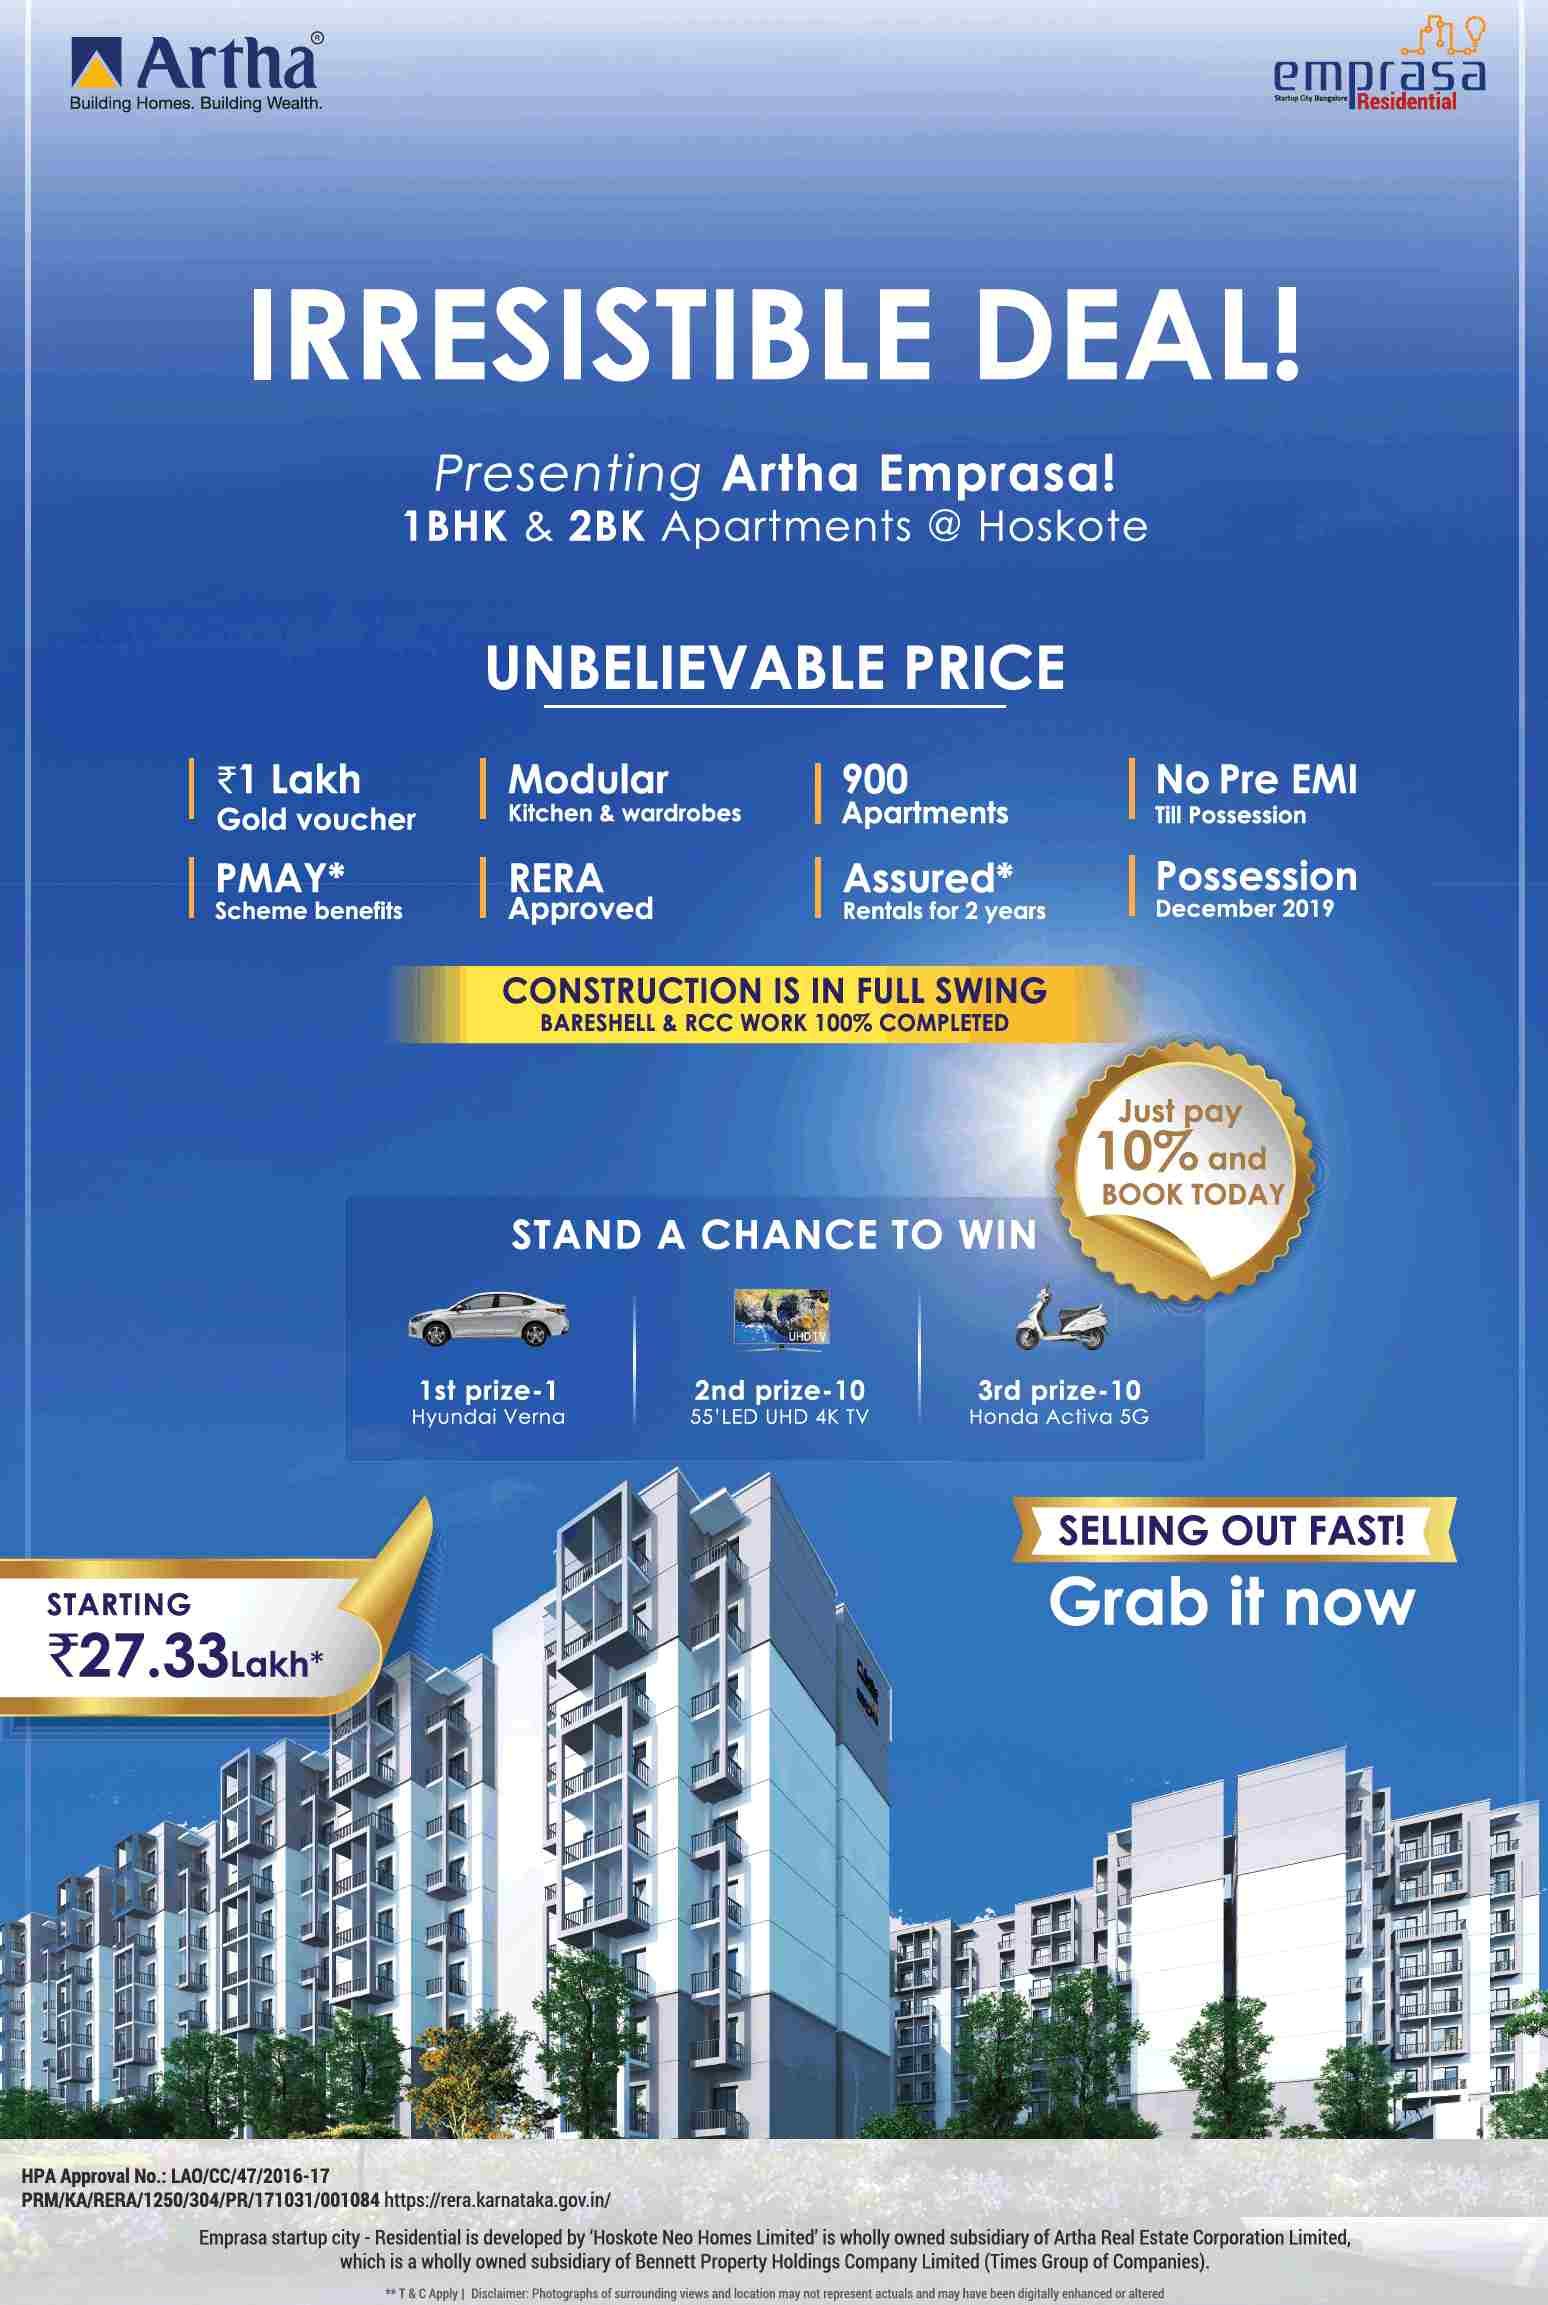 Just pay 10% and book today at Artha Emprasa in Hoskote, Bangalore Update